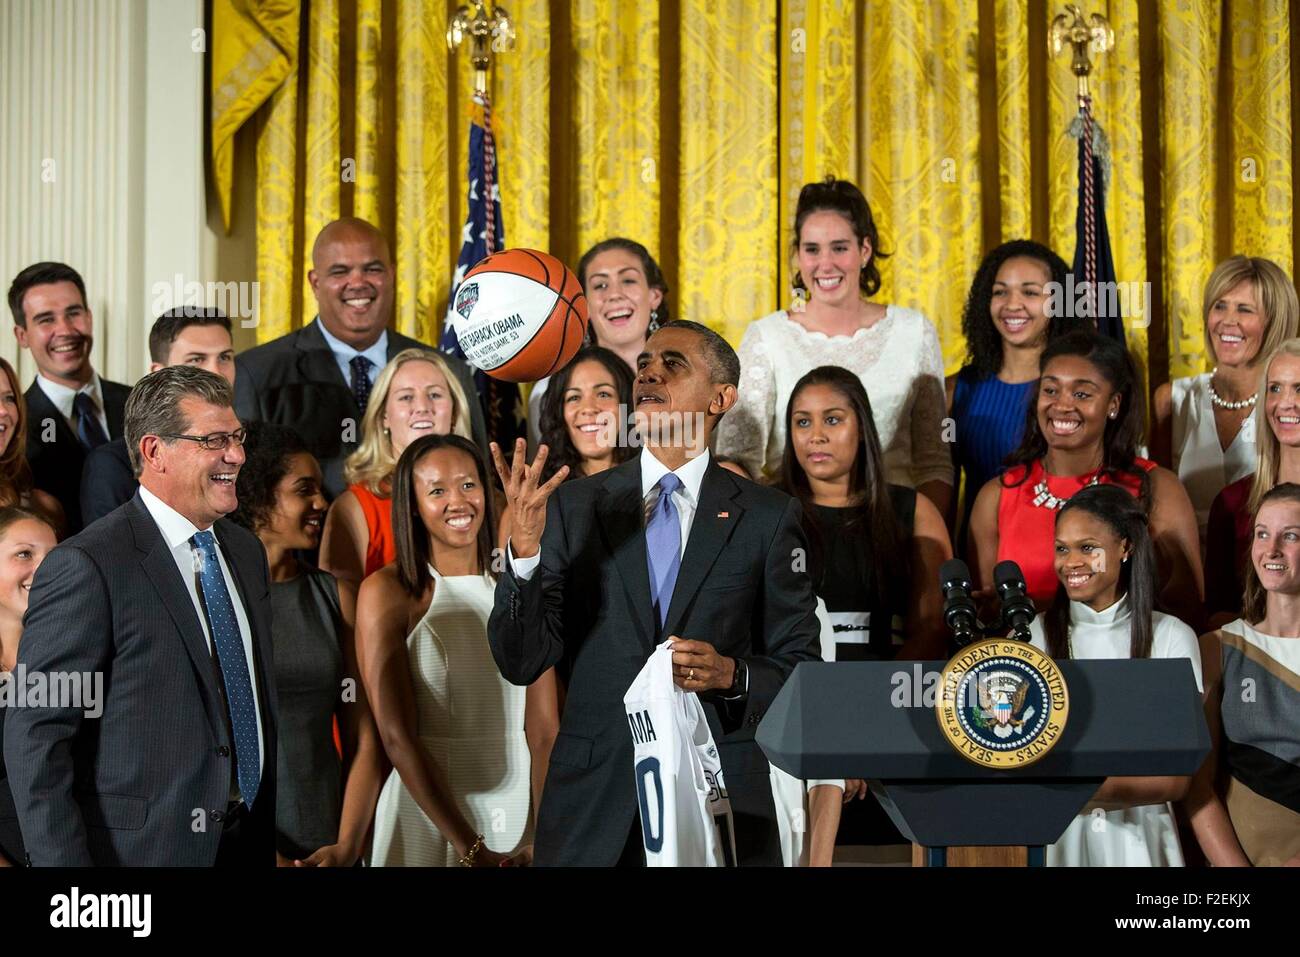 U.S. President Barack Obama meets with members of the University of Connecticut Huskies winners of the 2015 NCAA Women's Basketball Championship in the East Room of the White House September 15, 2015 in Washington, DC. Stock Photo